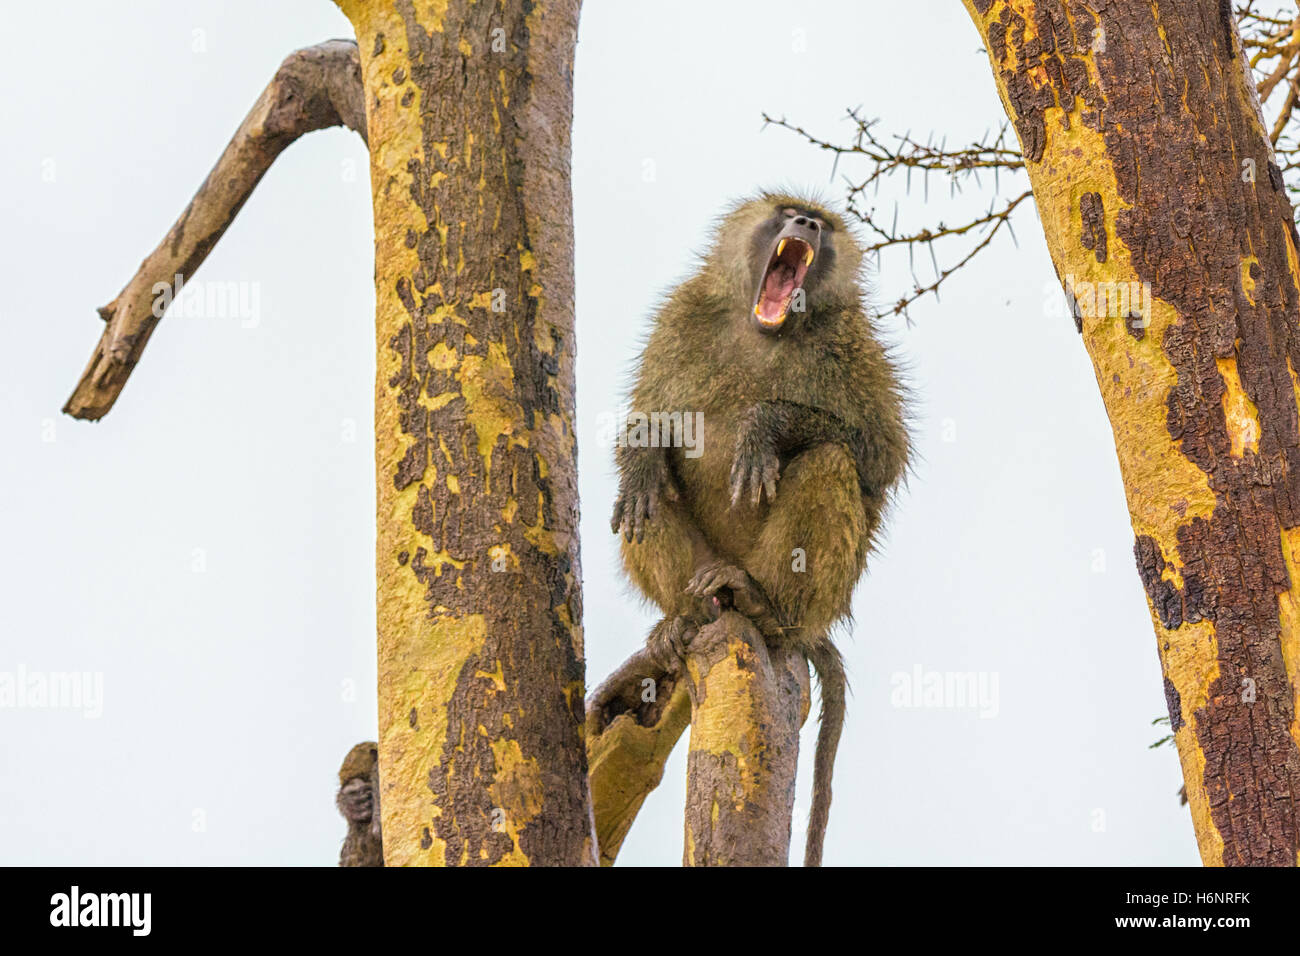 One Adult Wild Olive Baboon Papio anubis, yawning with a wide mouth showing teeth, Ol Pejeta Conservancy, northern Kenya, Africa Stock Photo